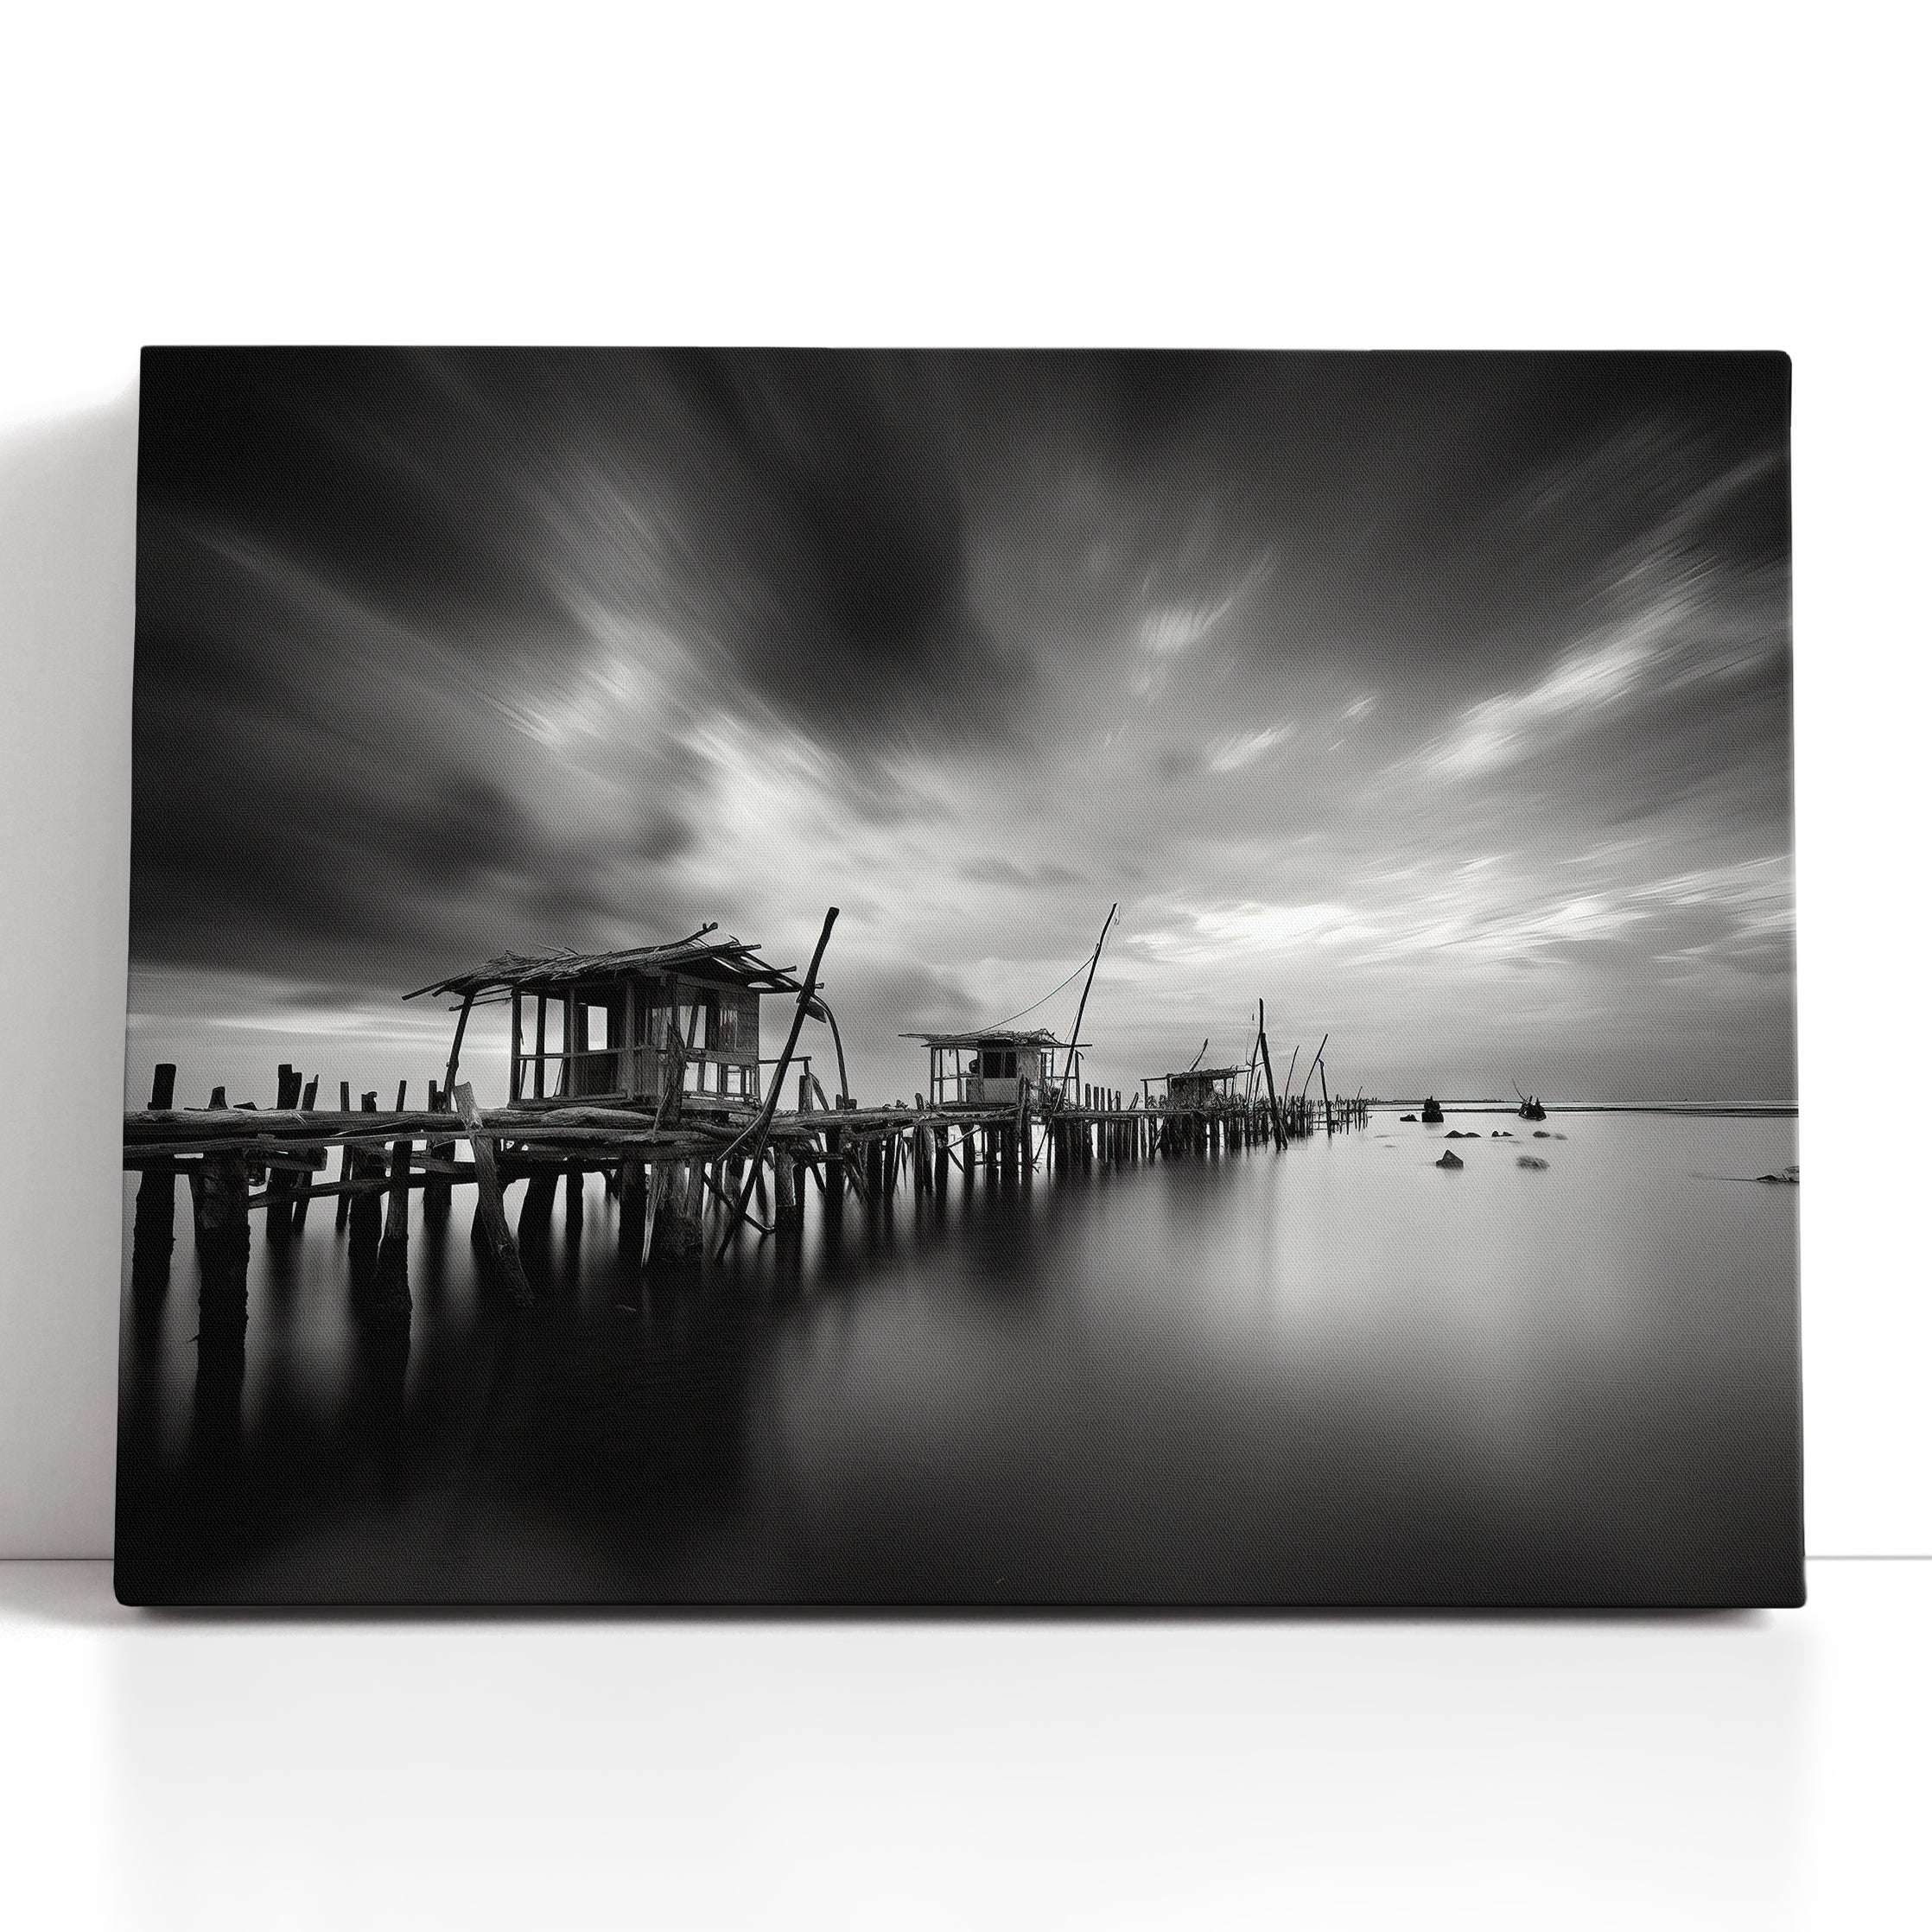 Atmospheric Sky over an Old Wooden Dock - Canvas Print - Artoholica Ready to Hang Canvas Print